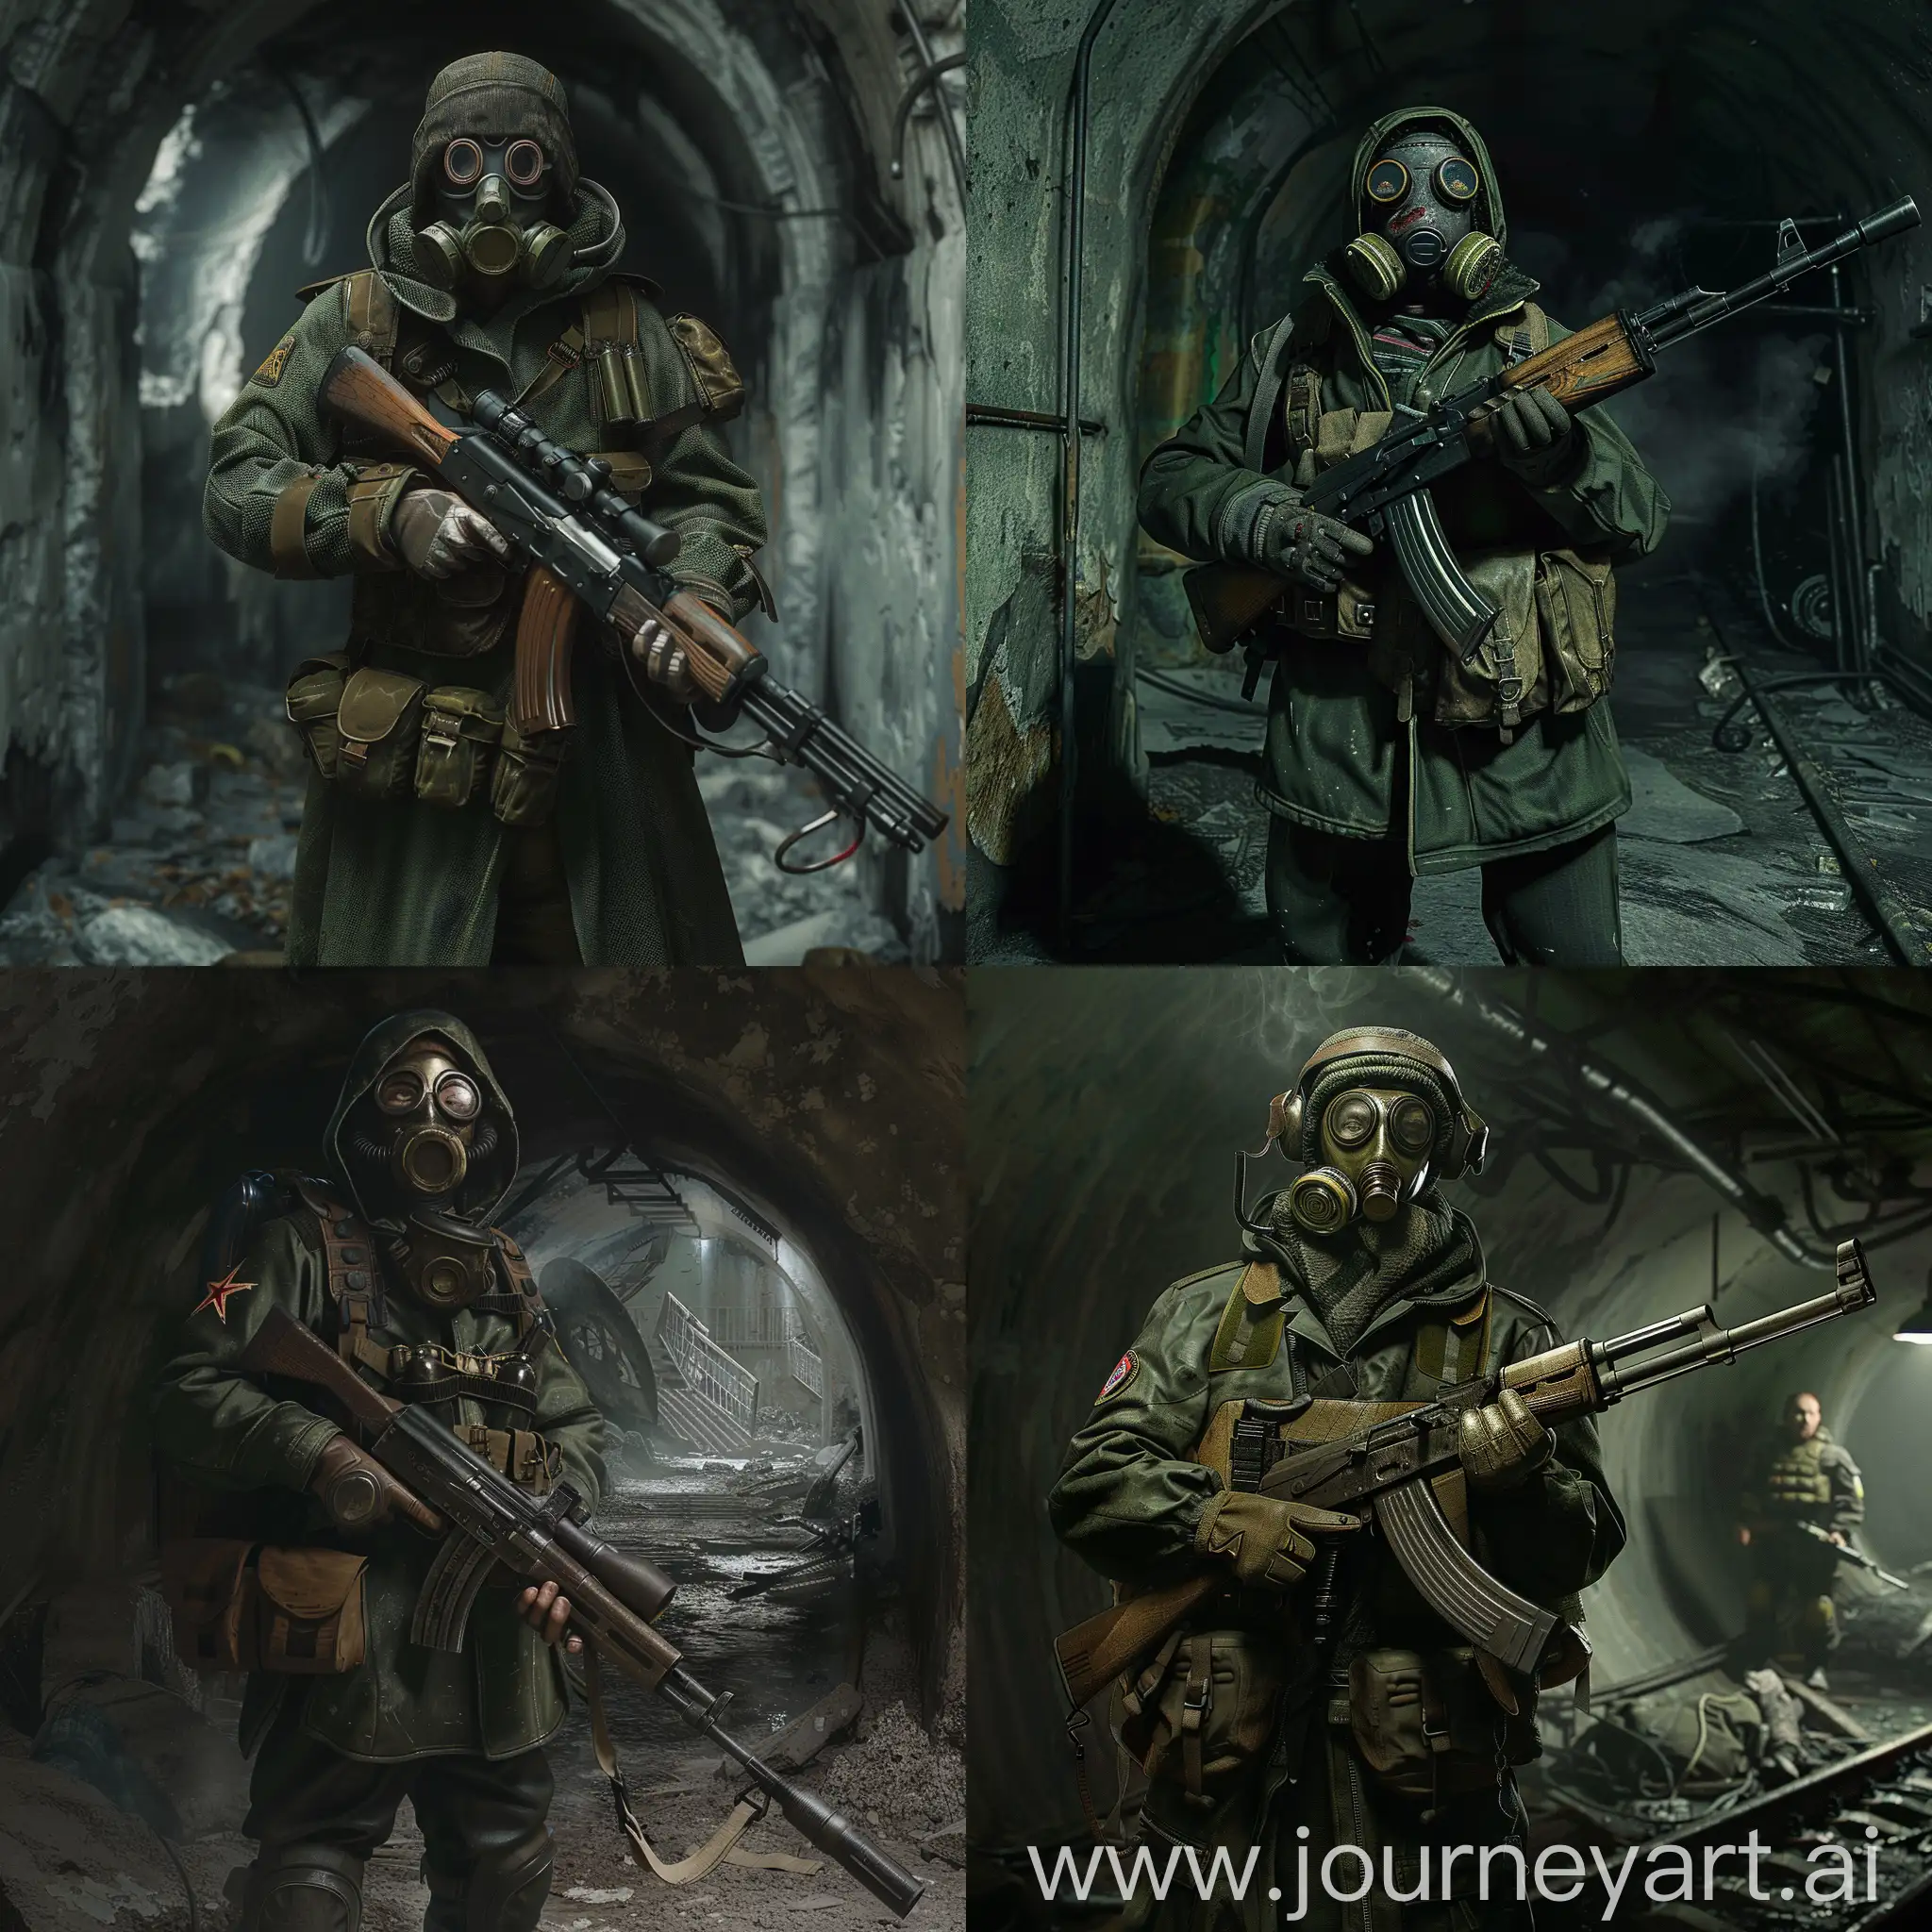 Survivor-in-PostApocalyptic-Armor-and-Gasmask-with-Soviet-Sniper-Rifle-in-Abandoned-Catacombs